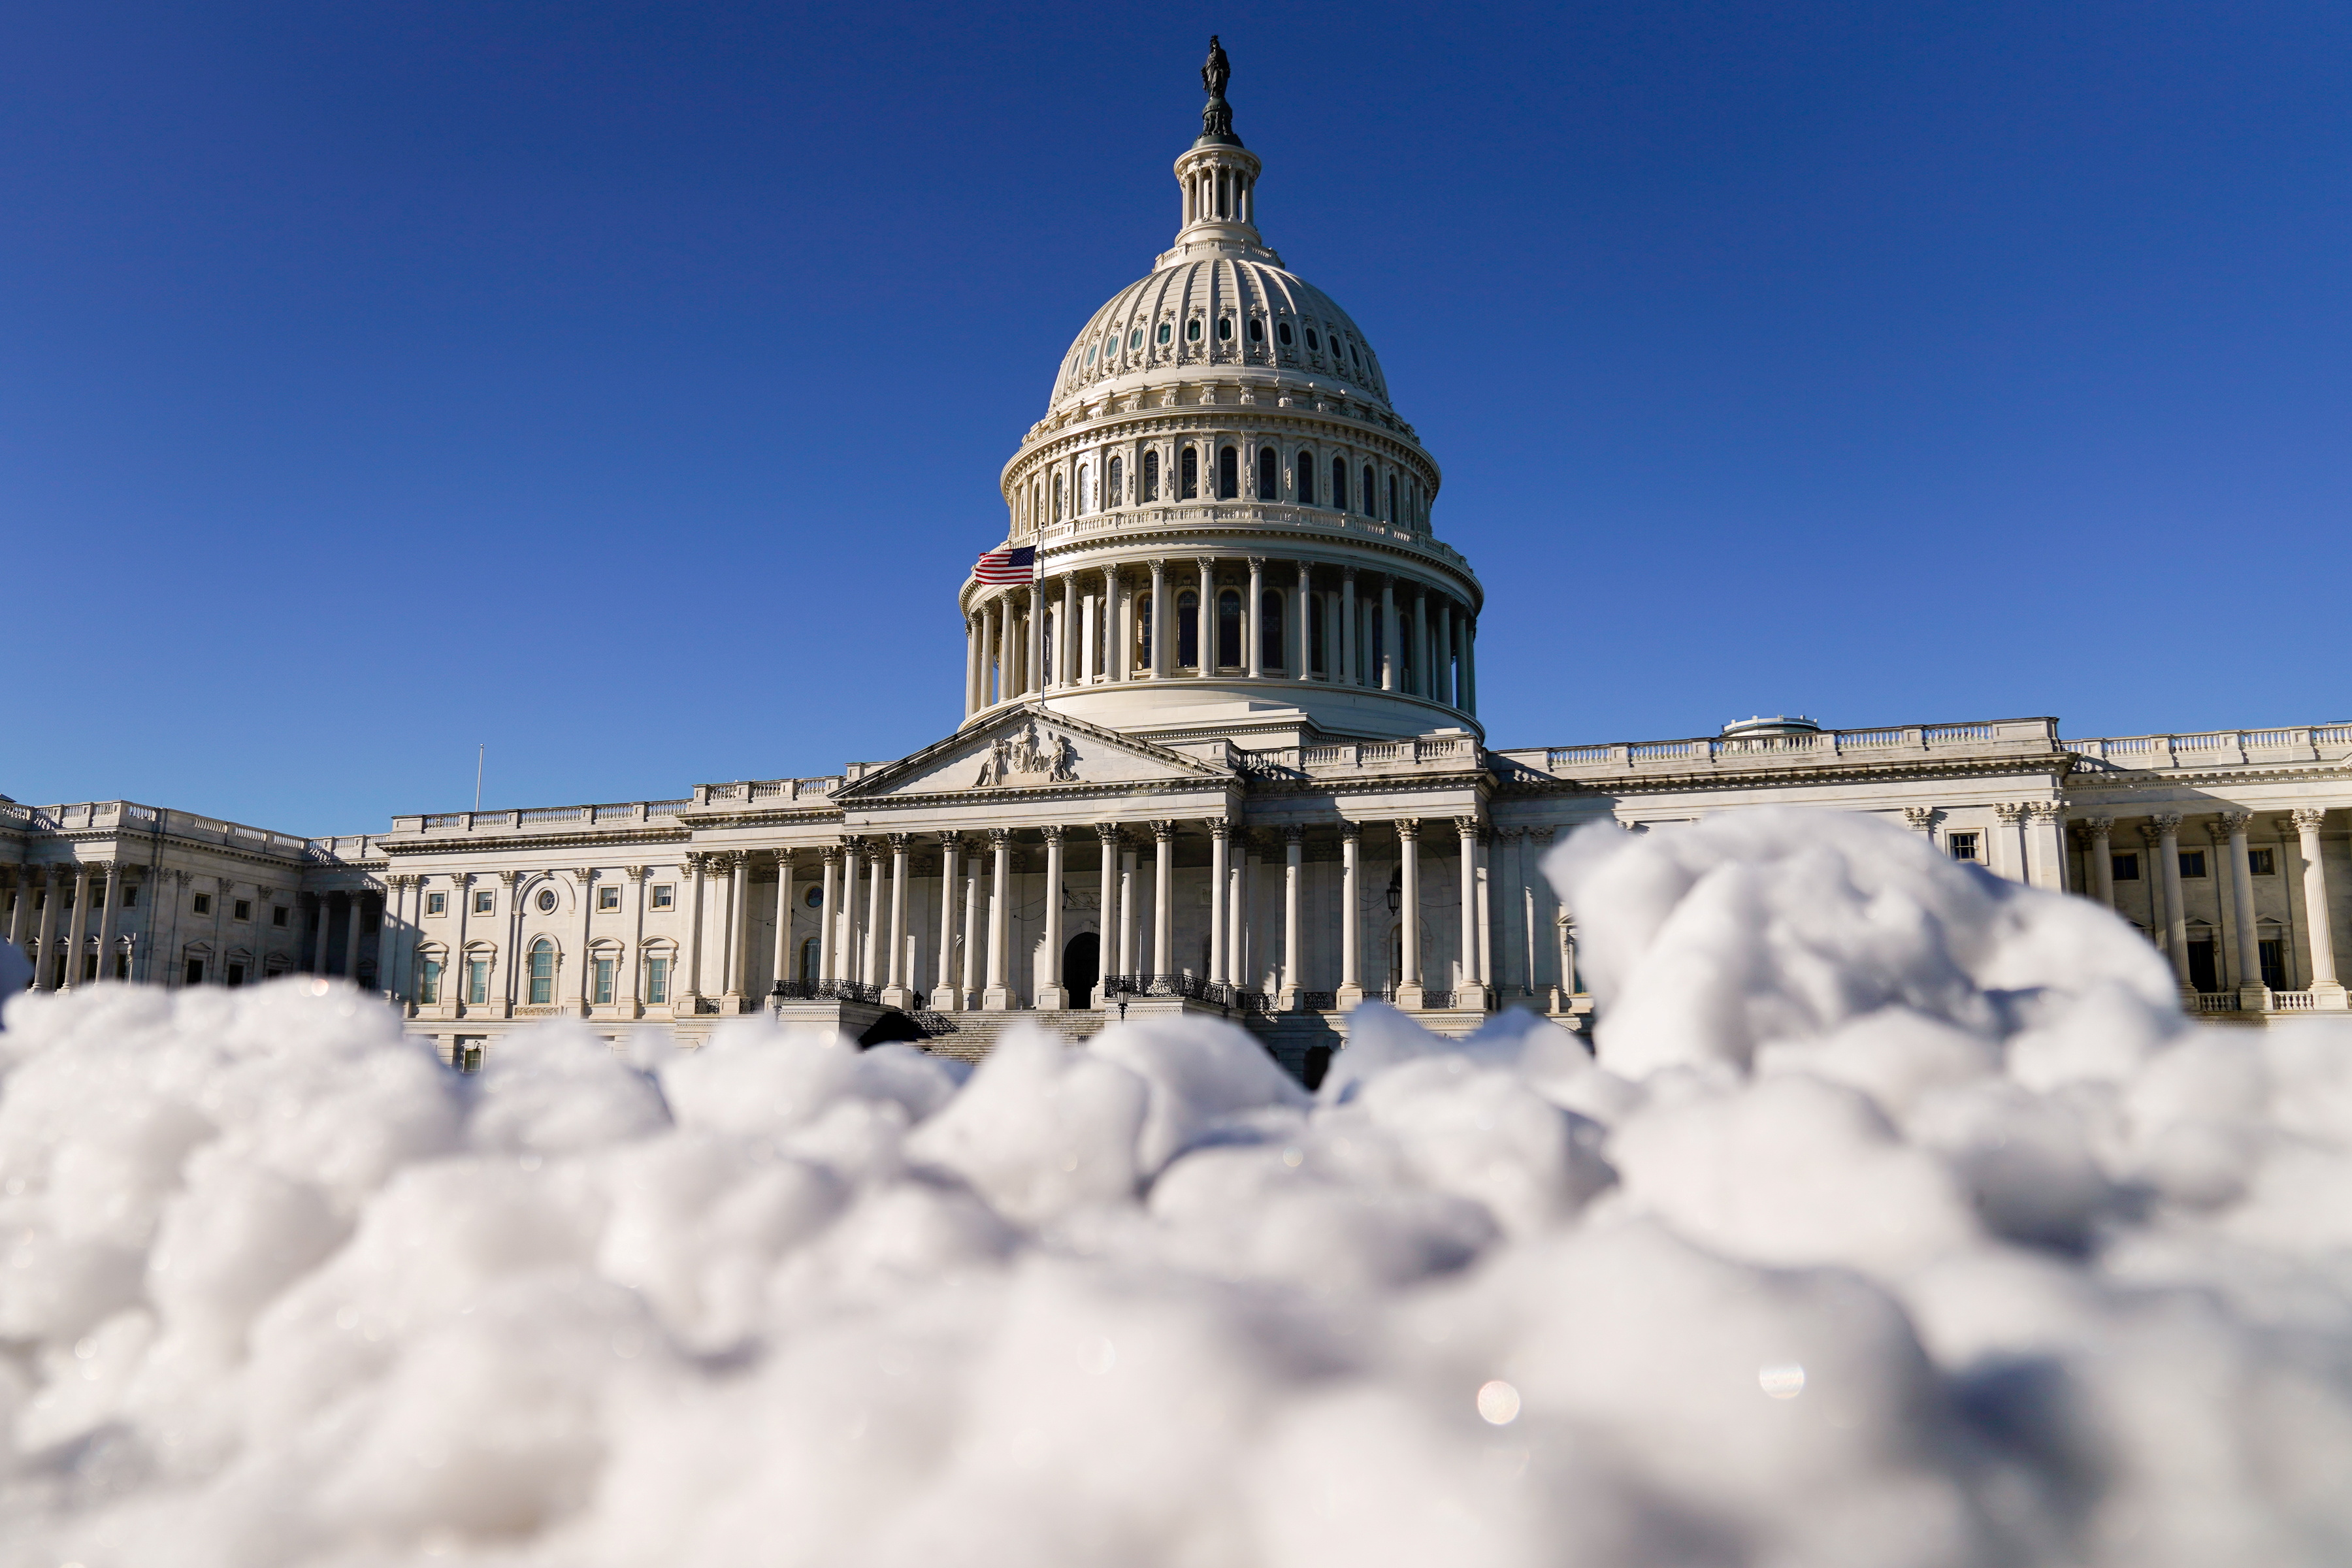 The U.S. Capitol is seen behind melting snow in Washington